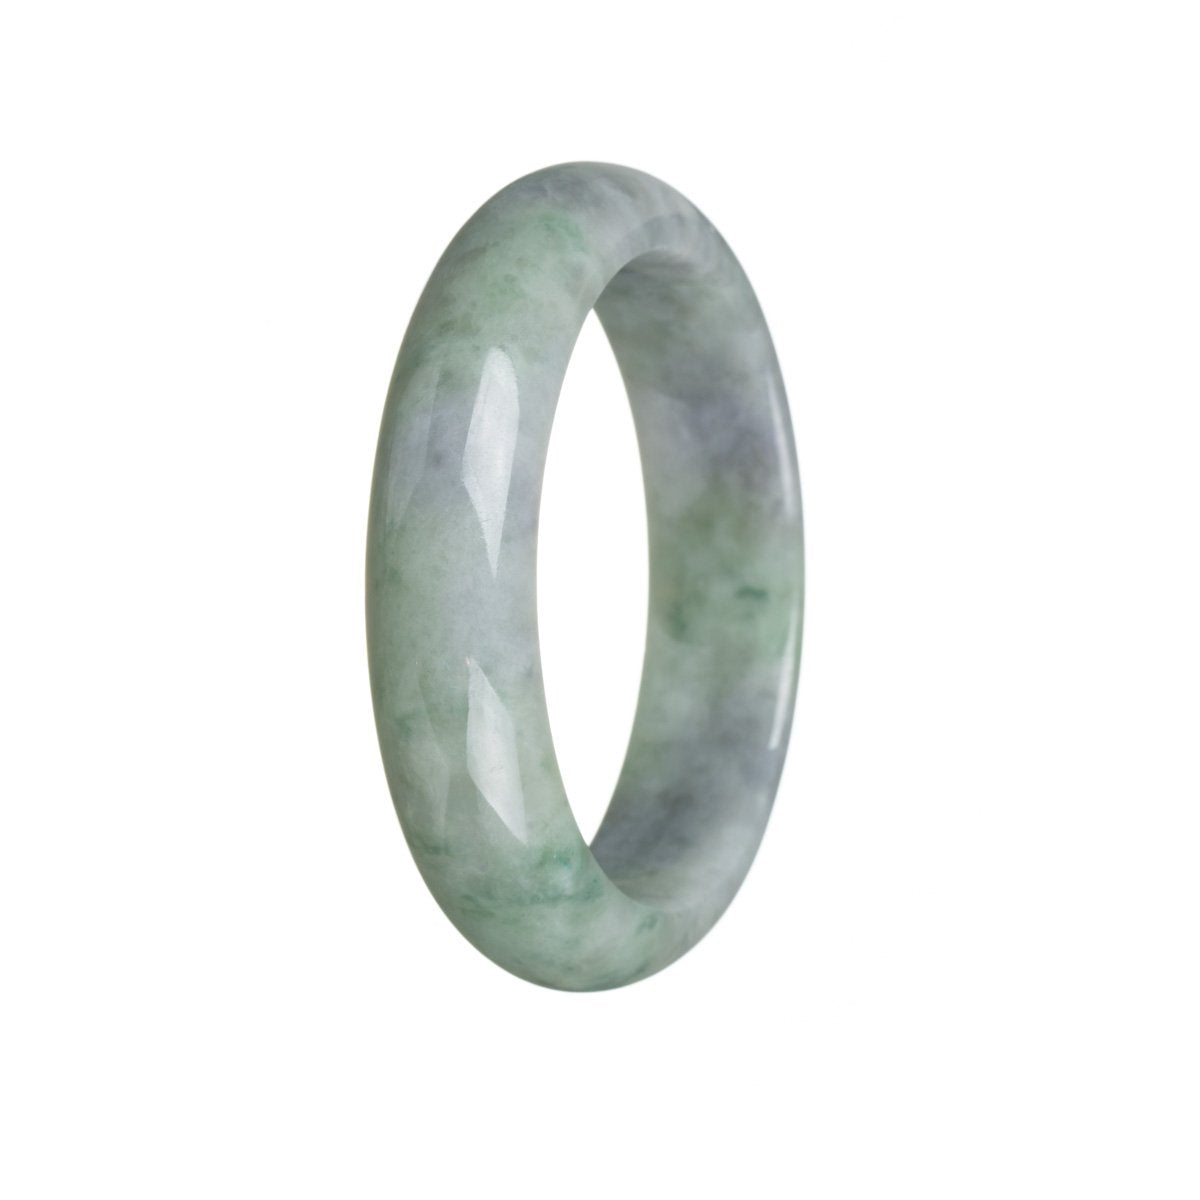 A close-up image of a green and lavender jadeite bangle bracelet, with a half-moon shape and a diameter of 57mm. The bracelet is certified Grade A and is sold by MAYS GEMS.